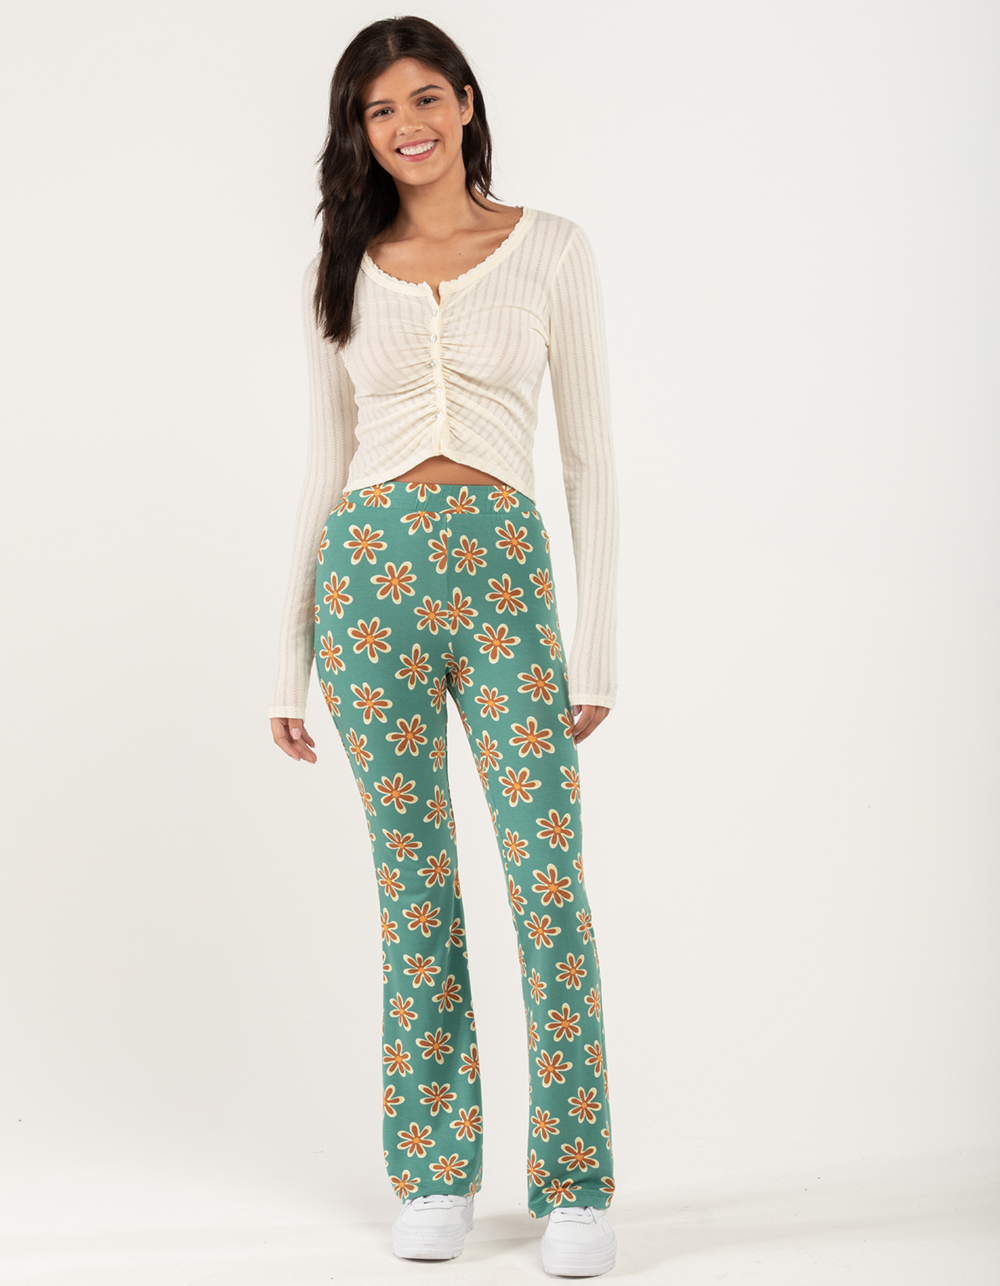 Floral trousers